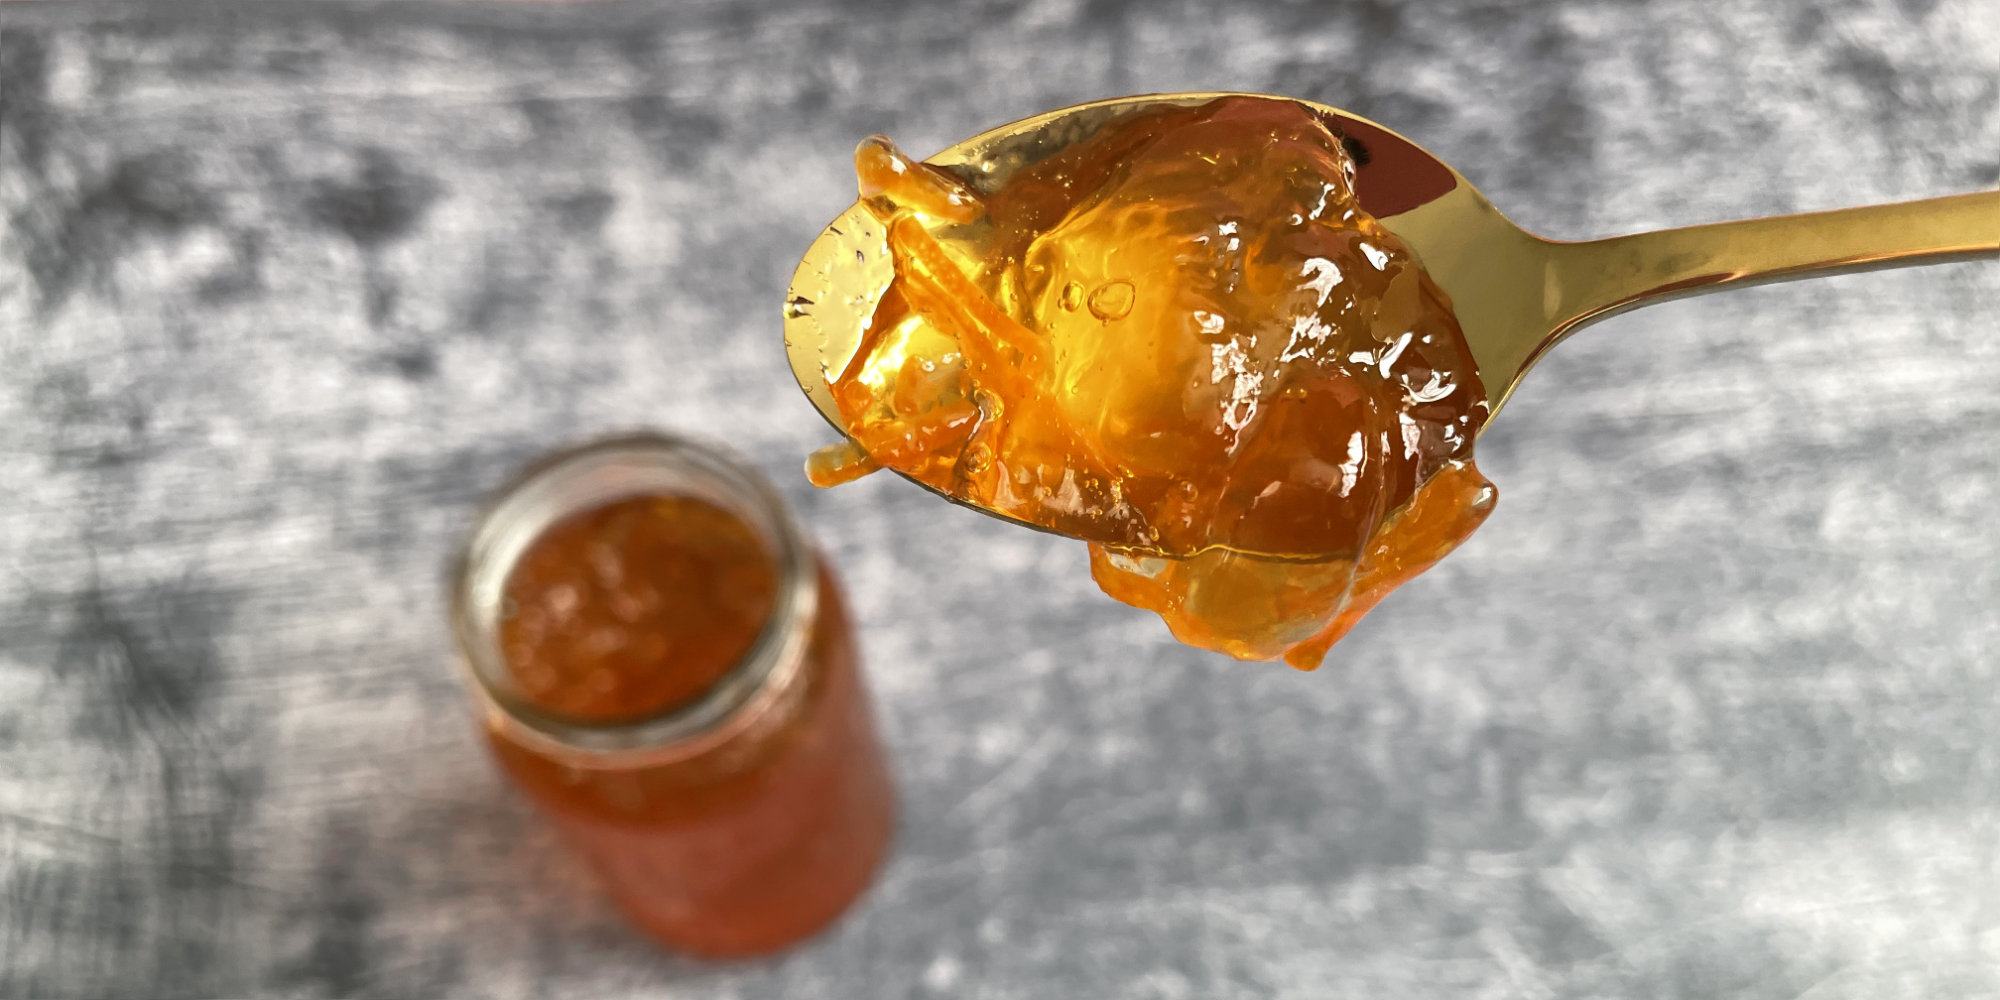 marmalade on a golden spoon, top down, with an open jar of marmalade in the background